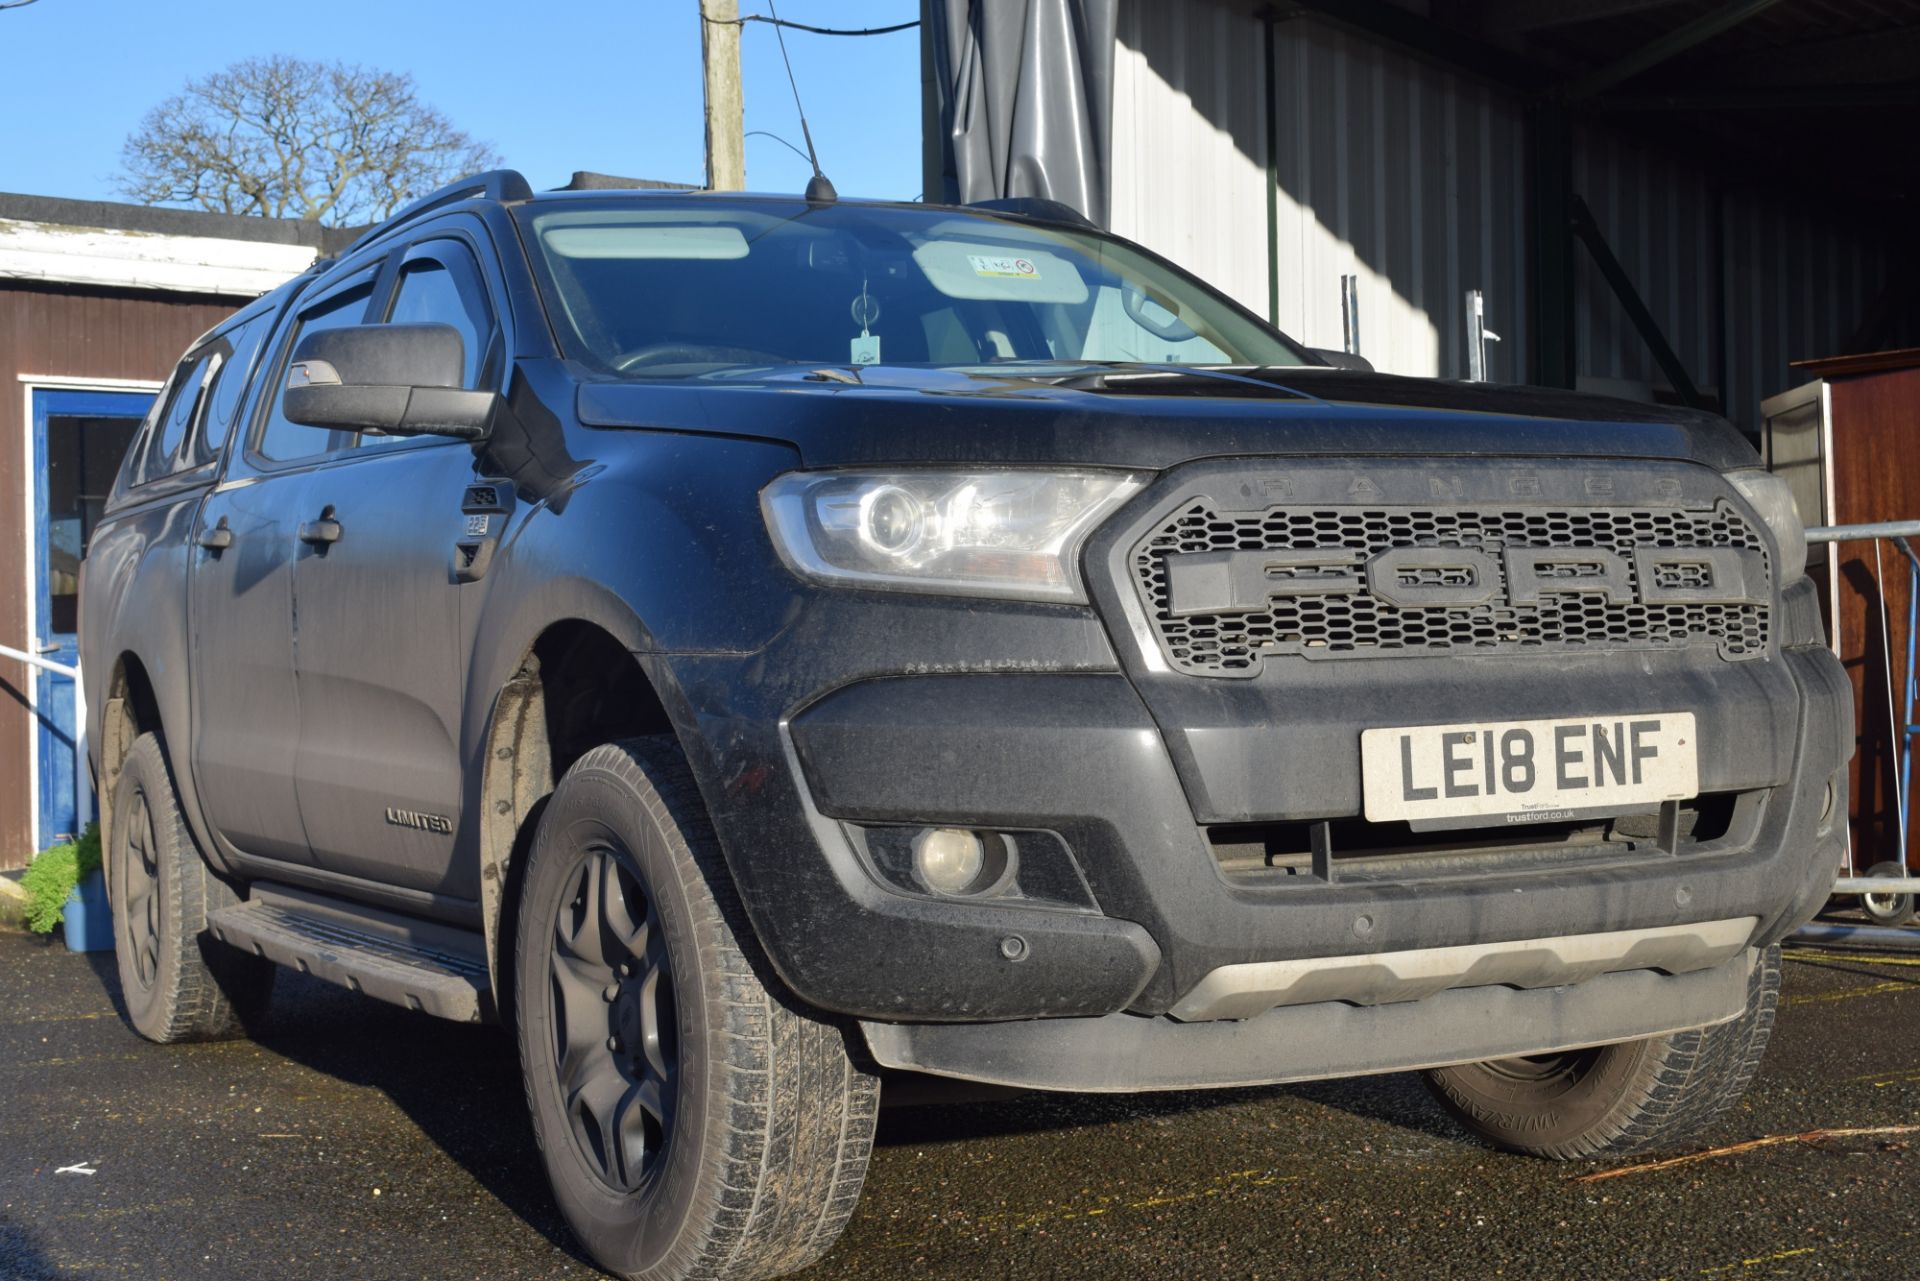 2018 Ford RANGER BLACK SIP 4X4 DCB TDCI Limited edition showing 51000 miles current MOT service